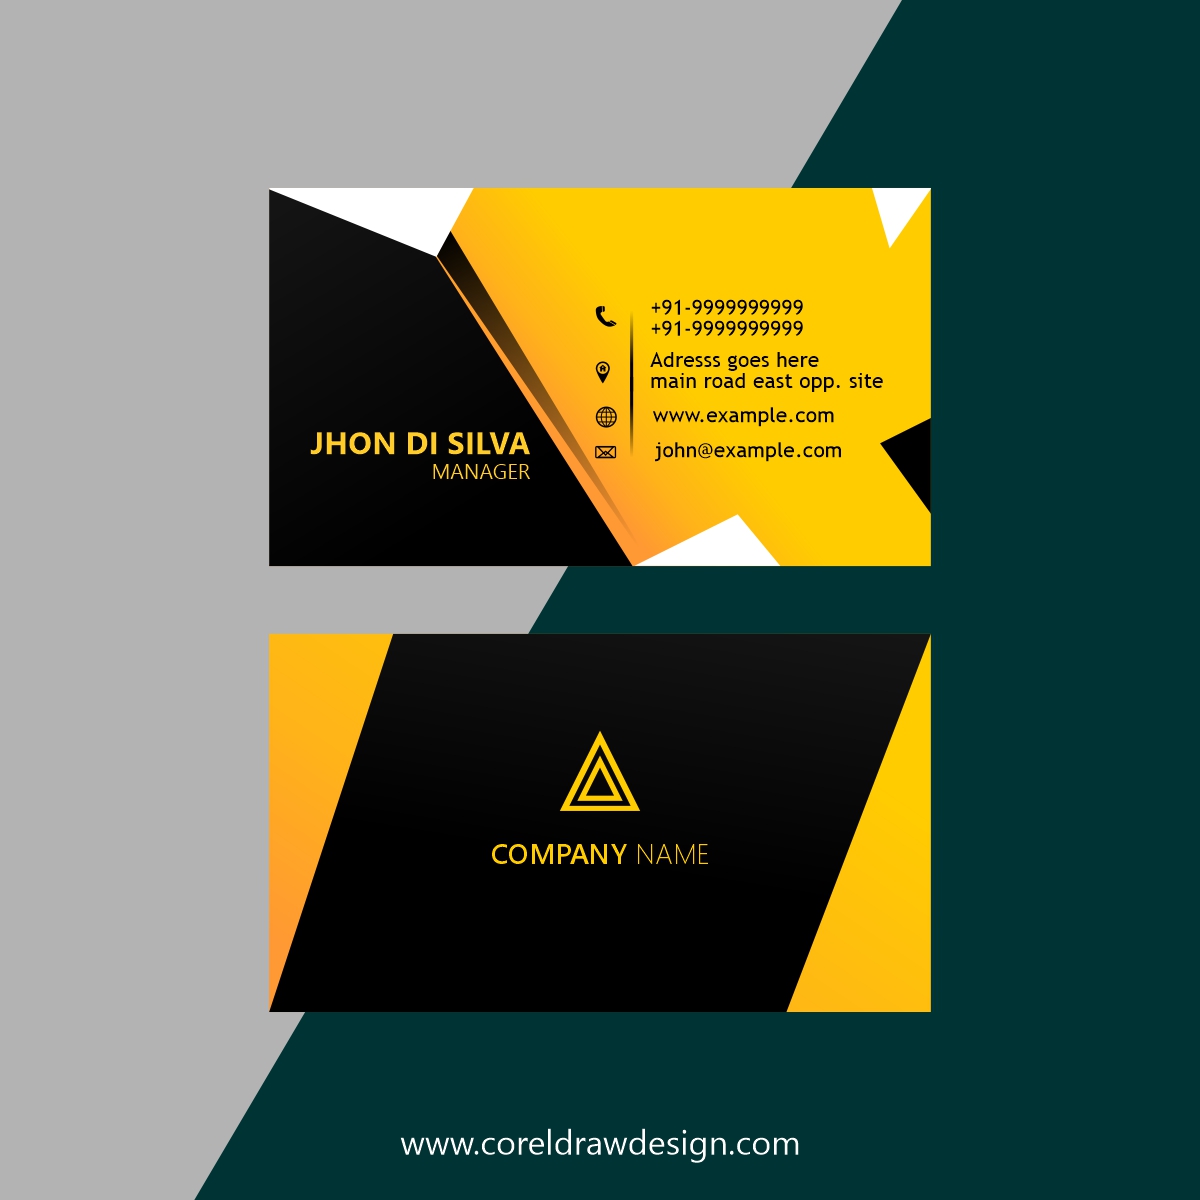 Coreldraw Business Cards Images With Regard To Templates For Visiting Cards Free Downloads